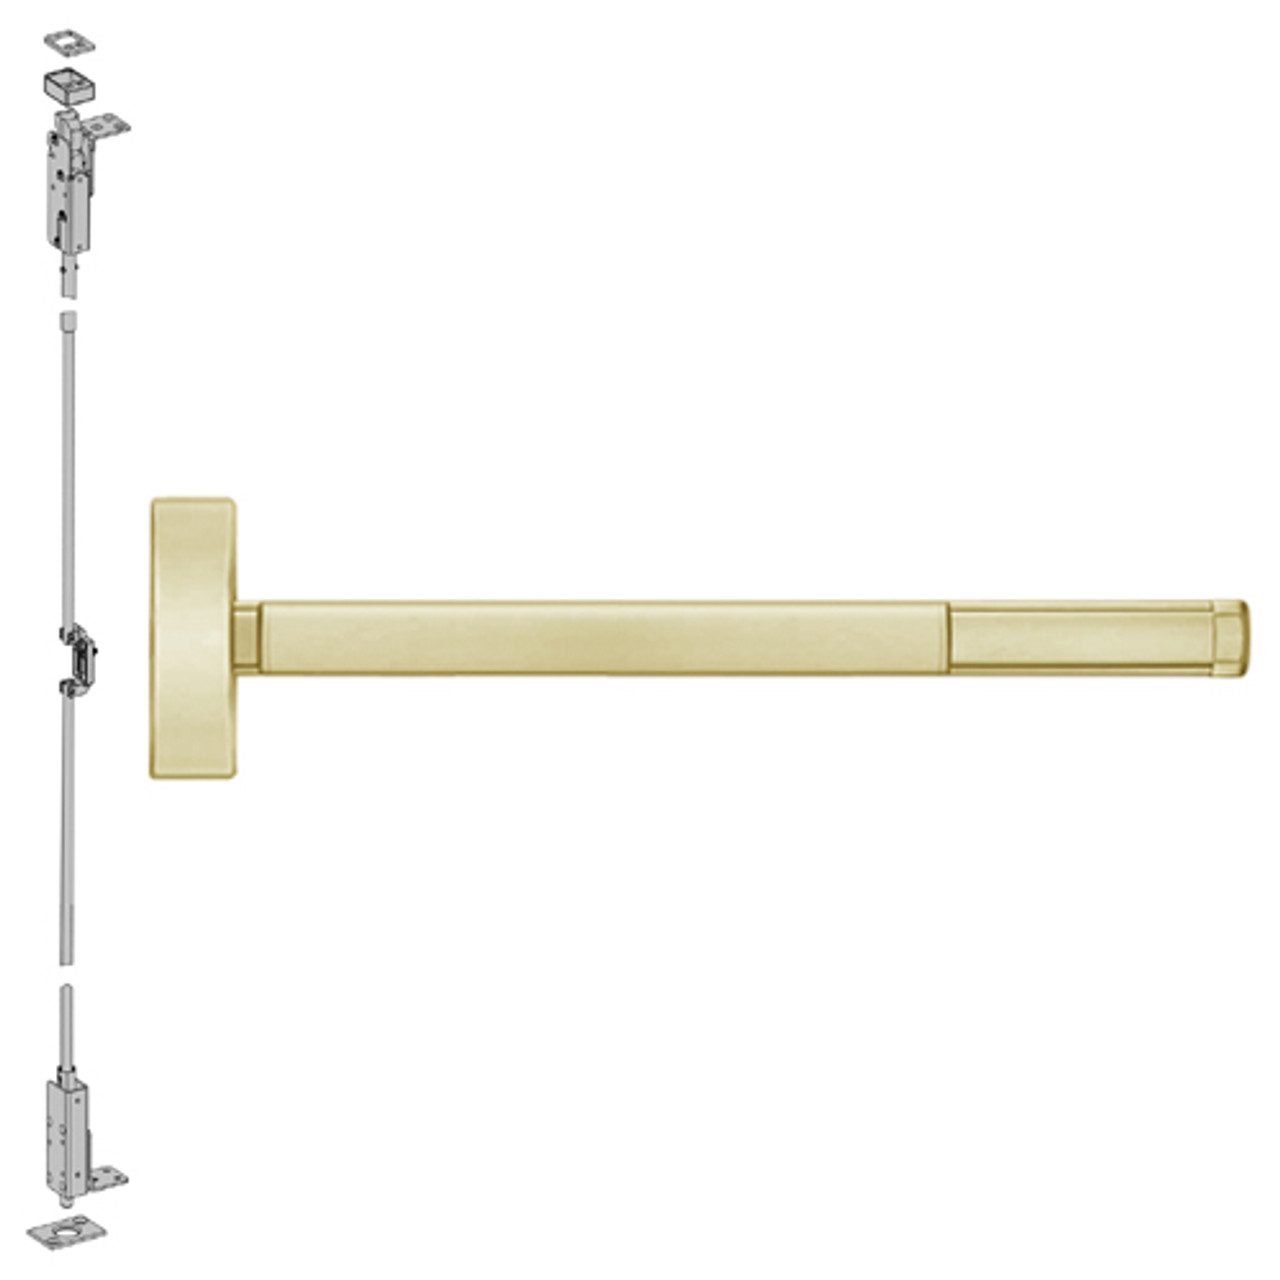 ELR2701LBR-606-36 PHI 2700 Series Wood Door Concealed Vertical Exit Device with Electric Latch Retraction Prepped for Cover Plate in Satin Brass Finish